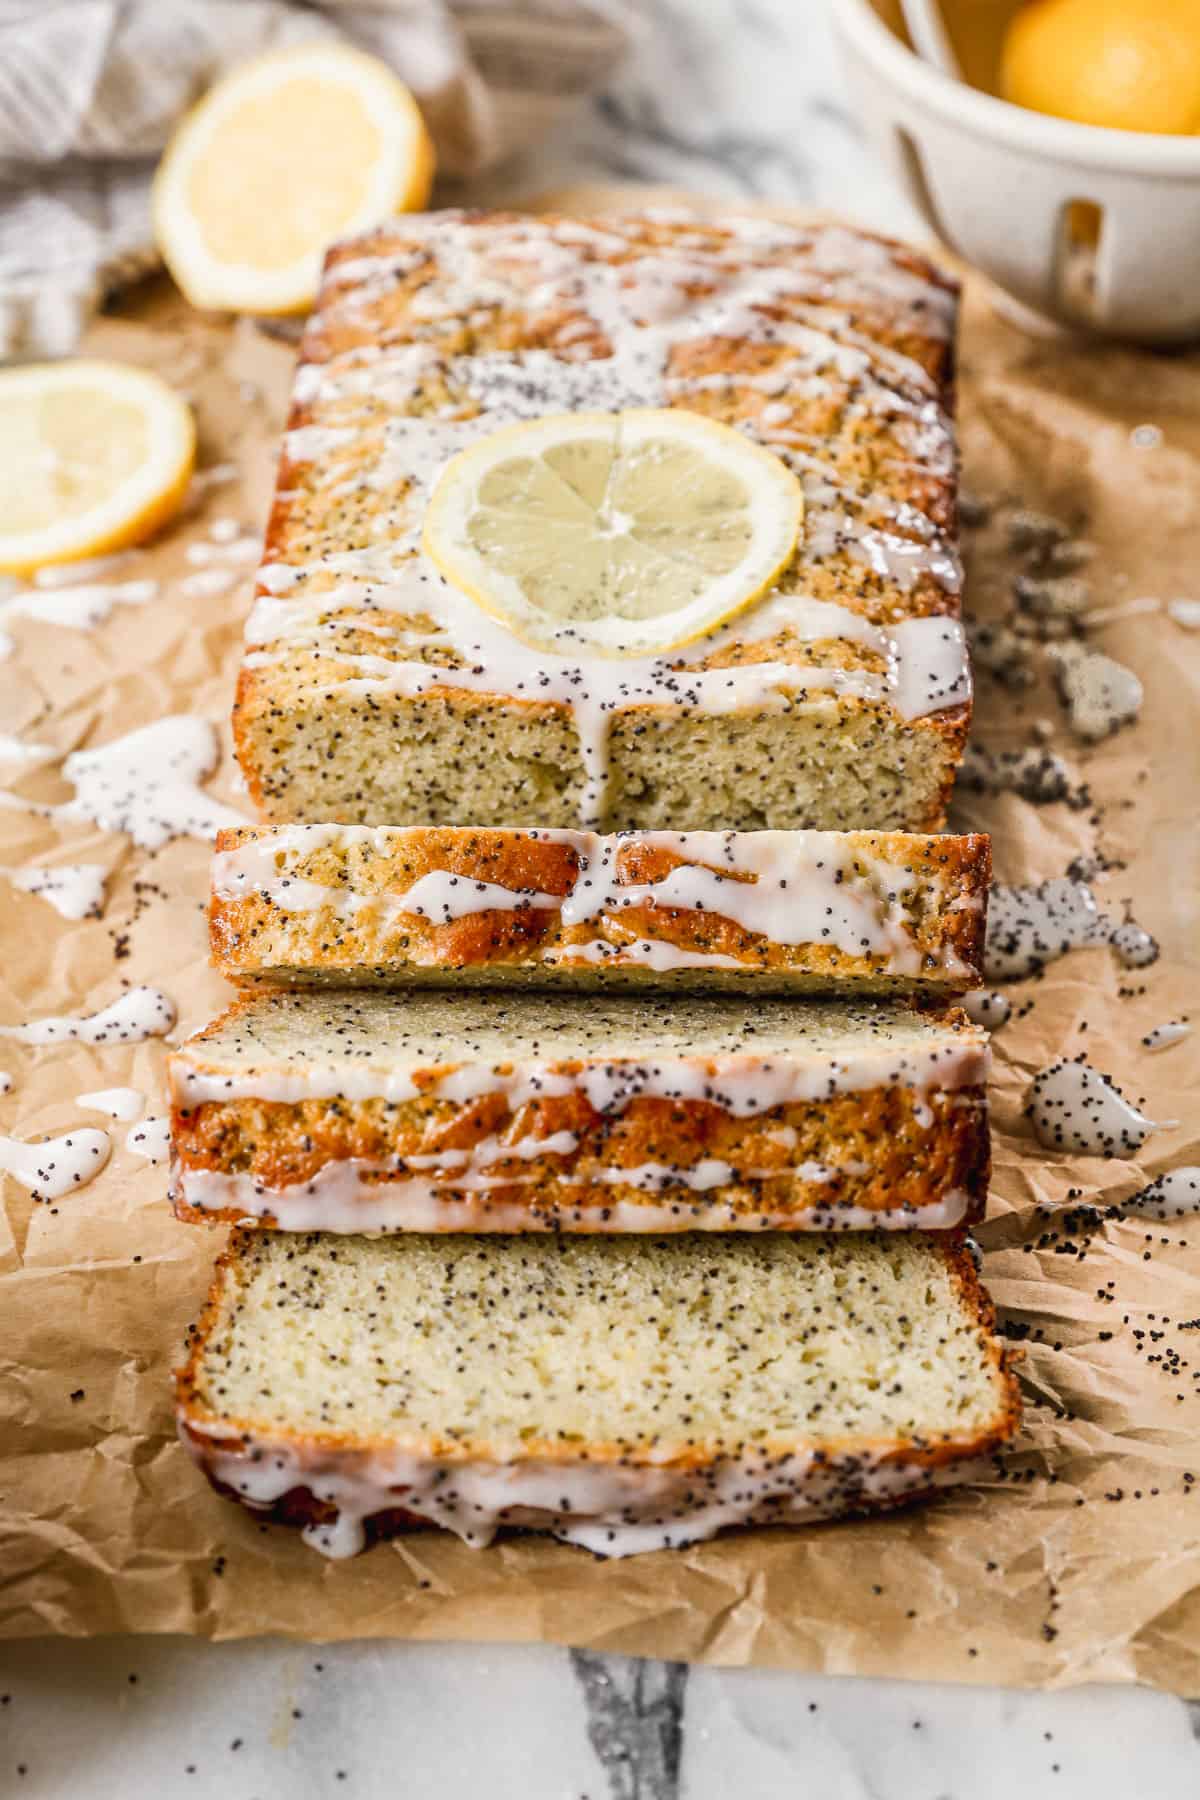 A loaf of the best lemon poppy seed bread recipe with a lemon glaze on top, and a few slices cut.